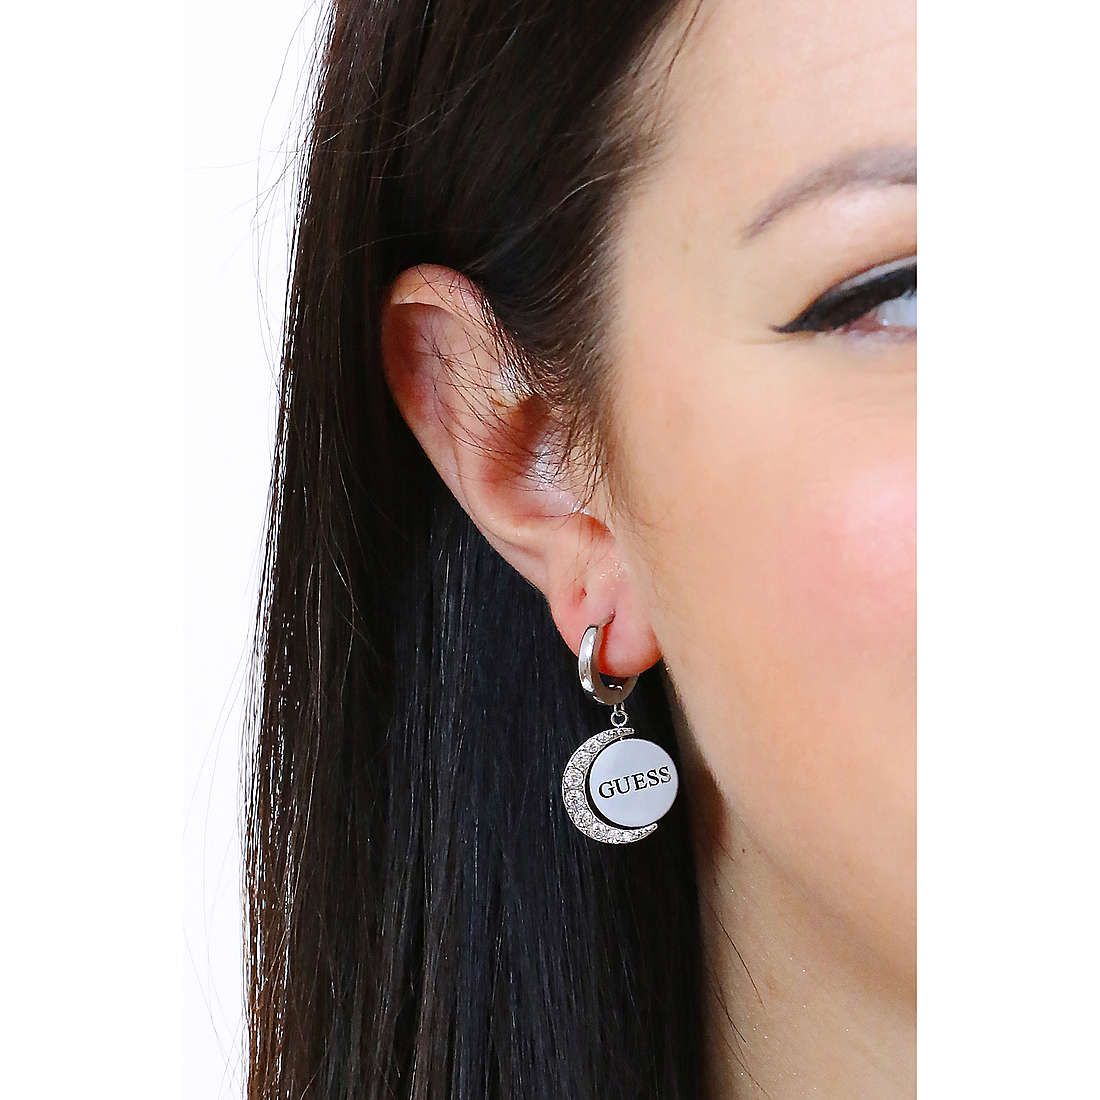 Guess boucles d'oreille Moon Phases femme JUBE01192JWRHT/U photo wearing